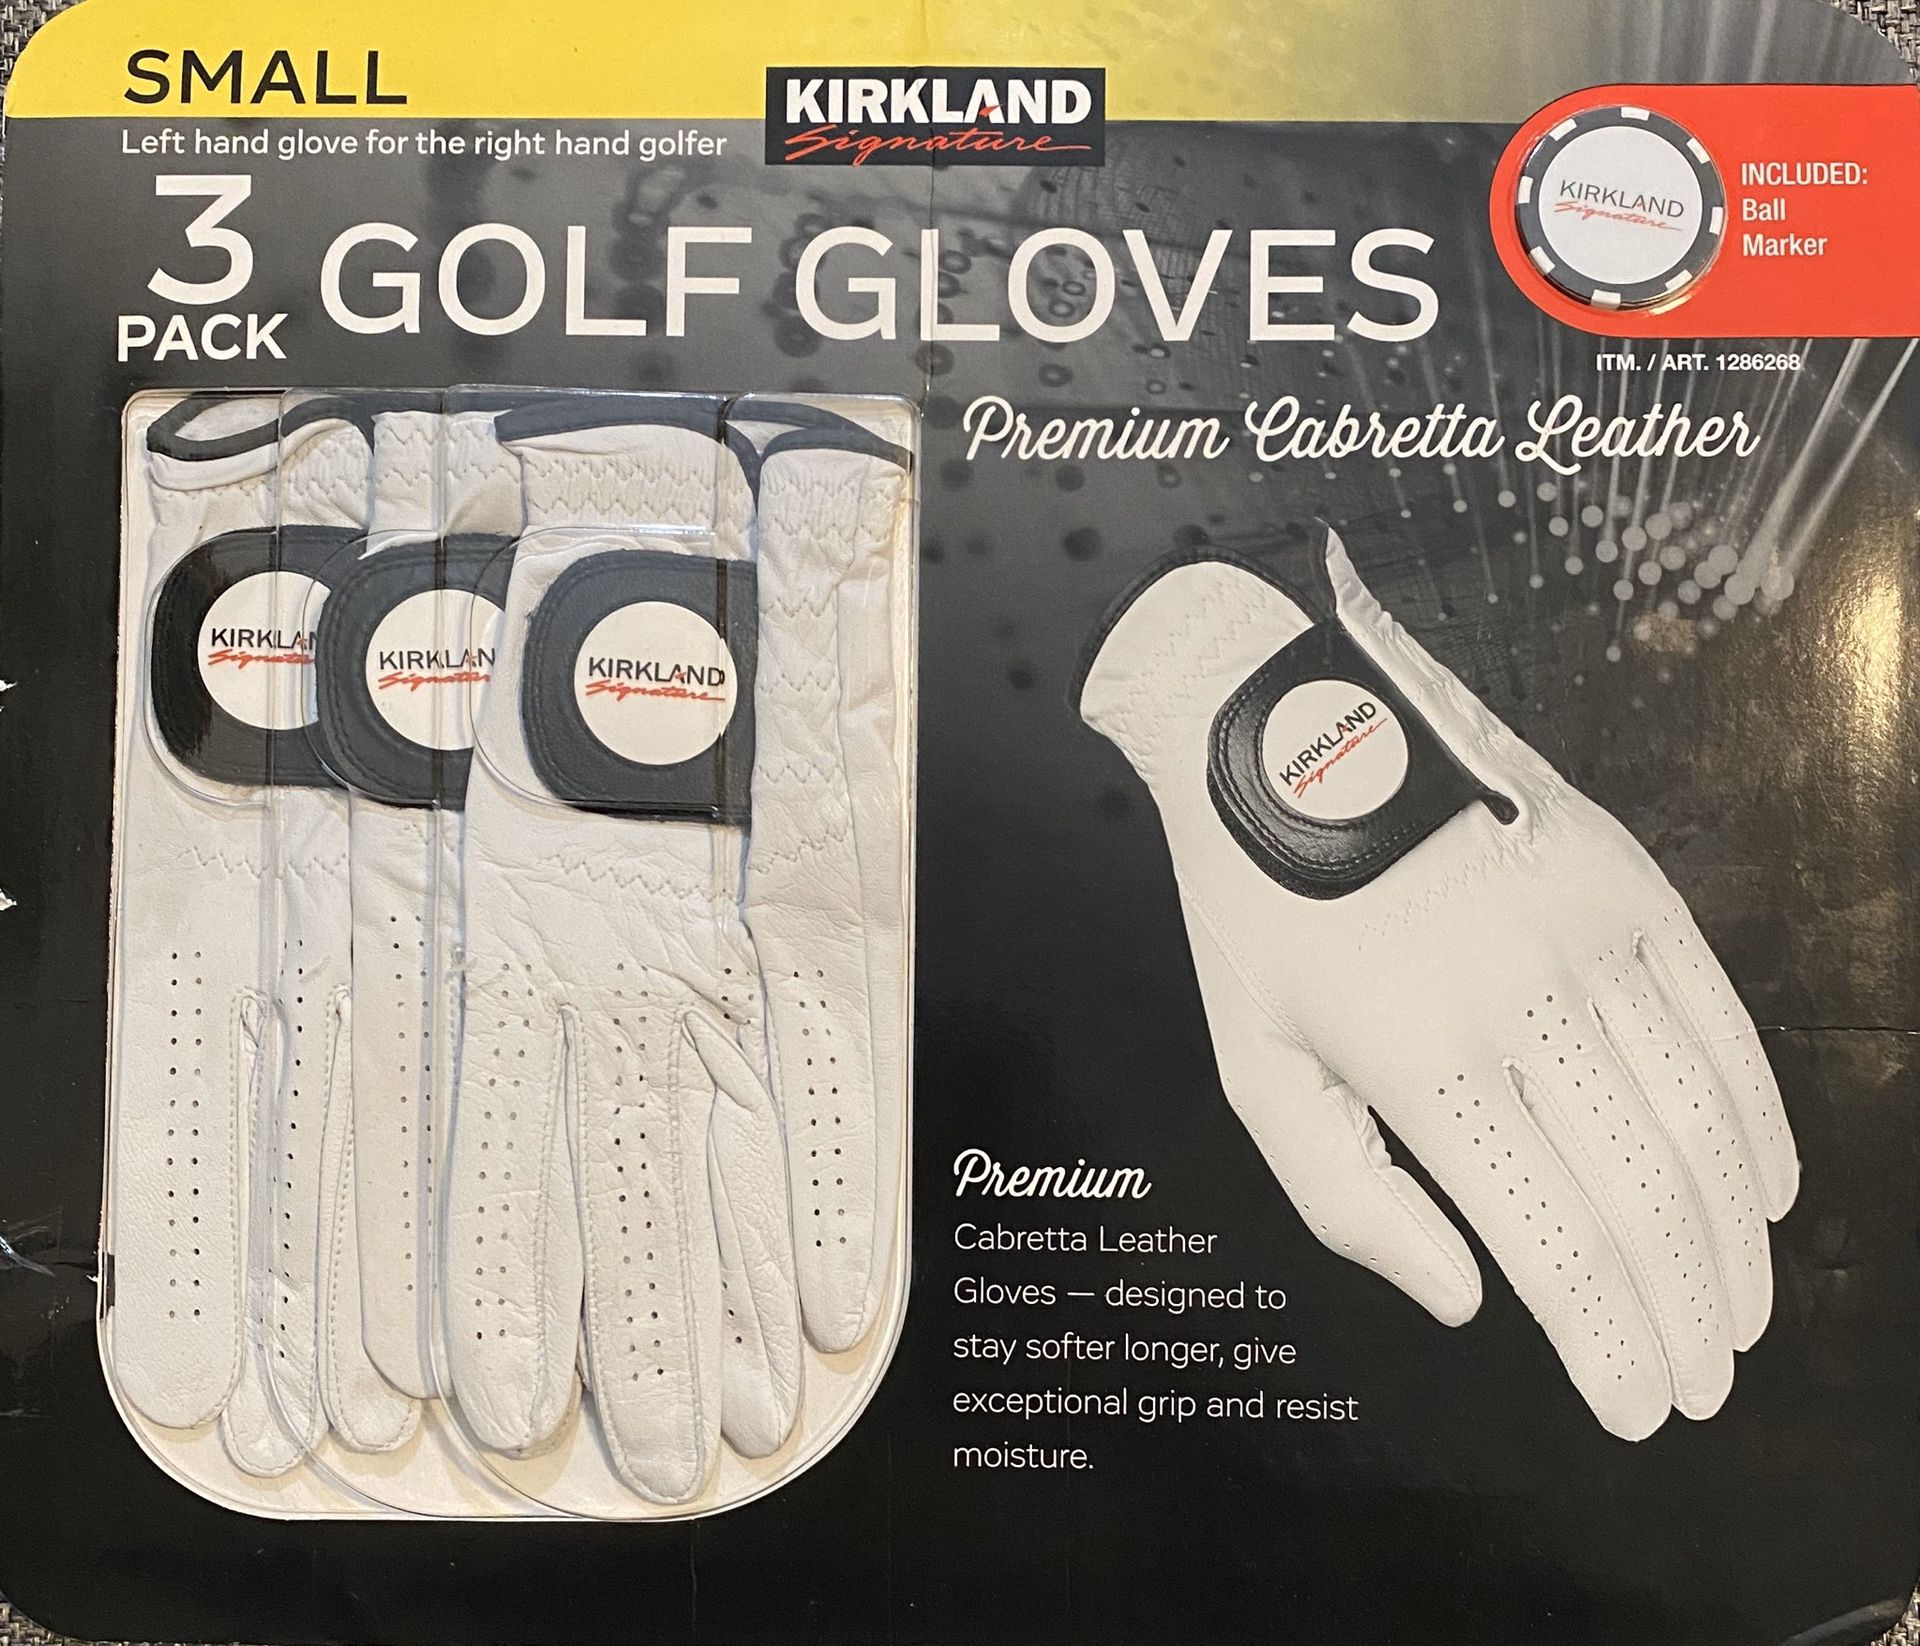 Kirkland Signature Golf Gloves Prem. Cabretta Leather 3Pack-Small New . Package.Condition: Open Box / Unused Have a wonderful day and Thank you for y